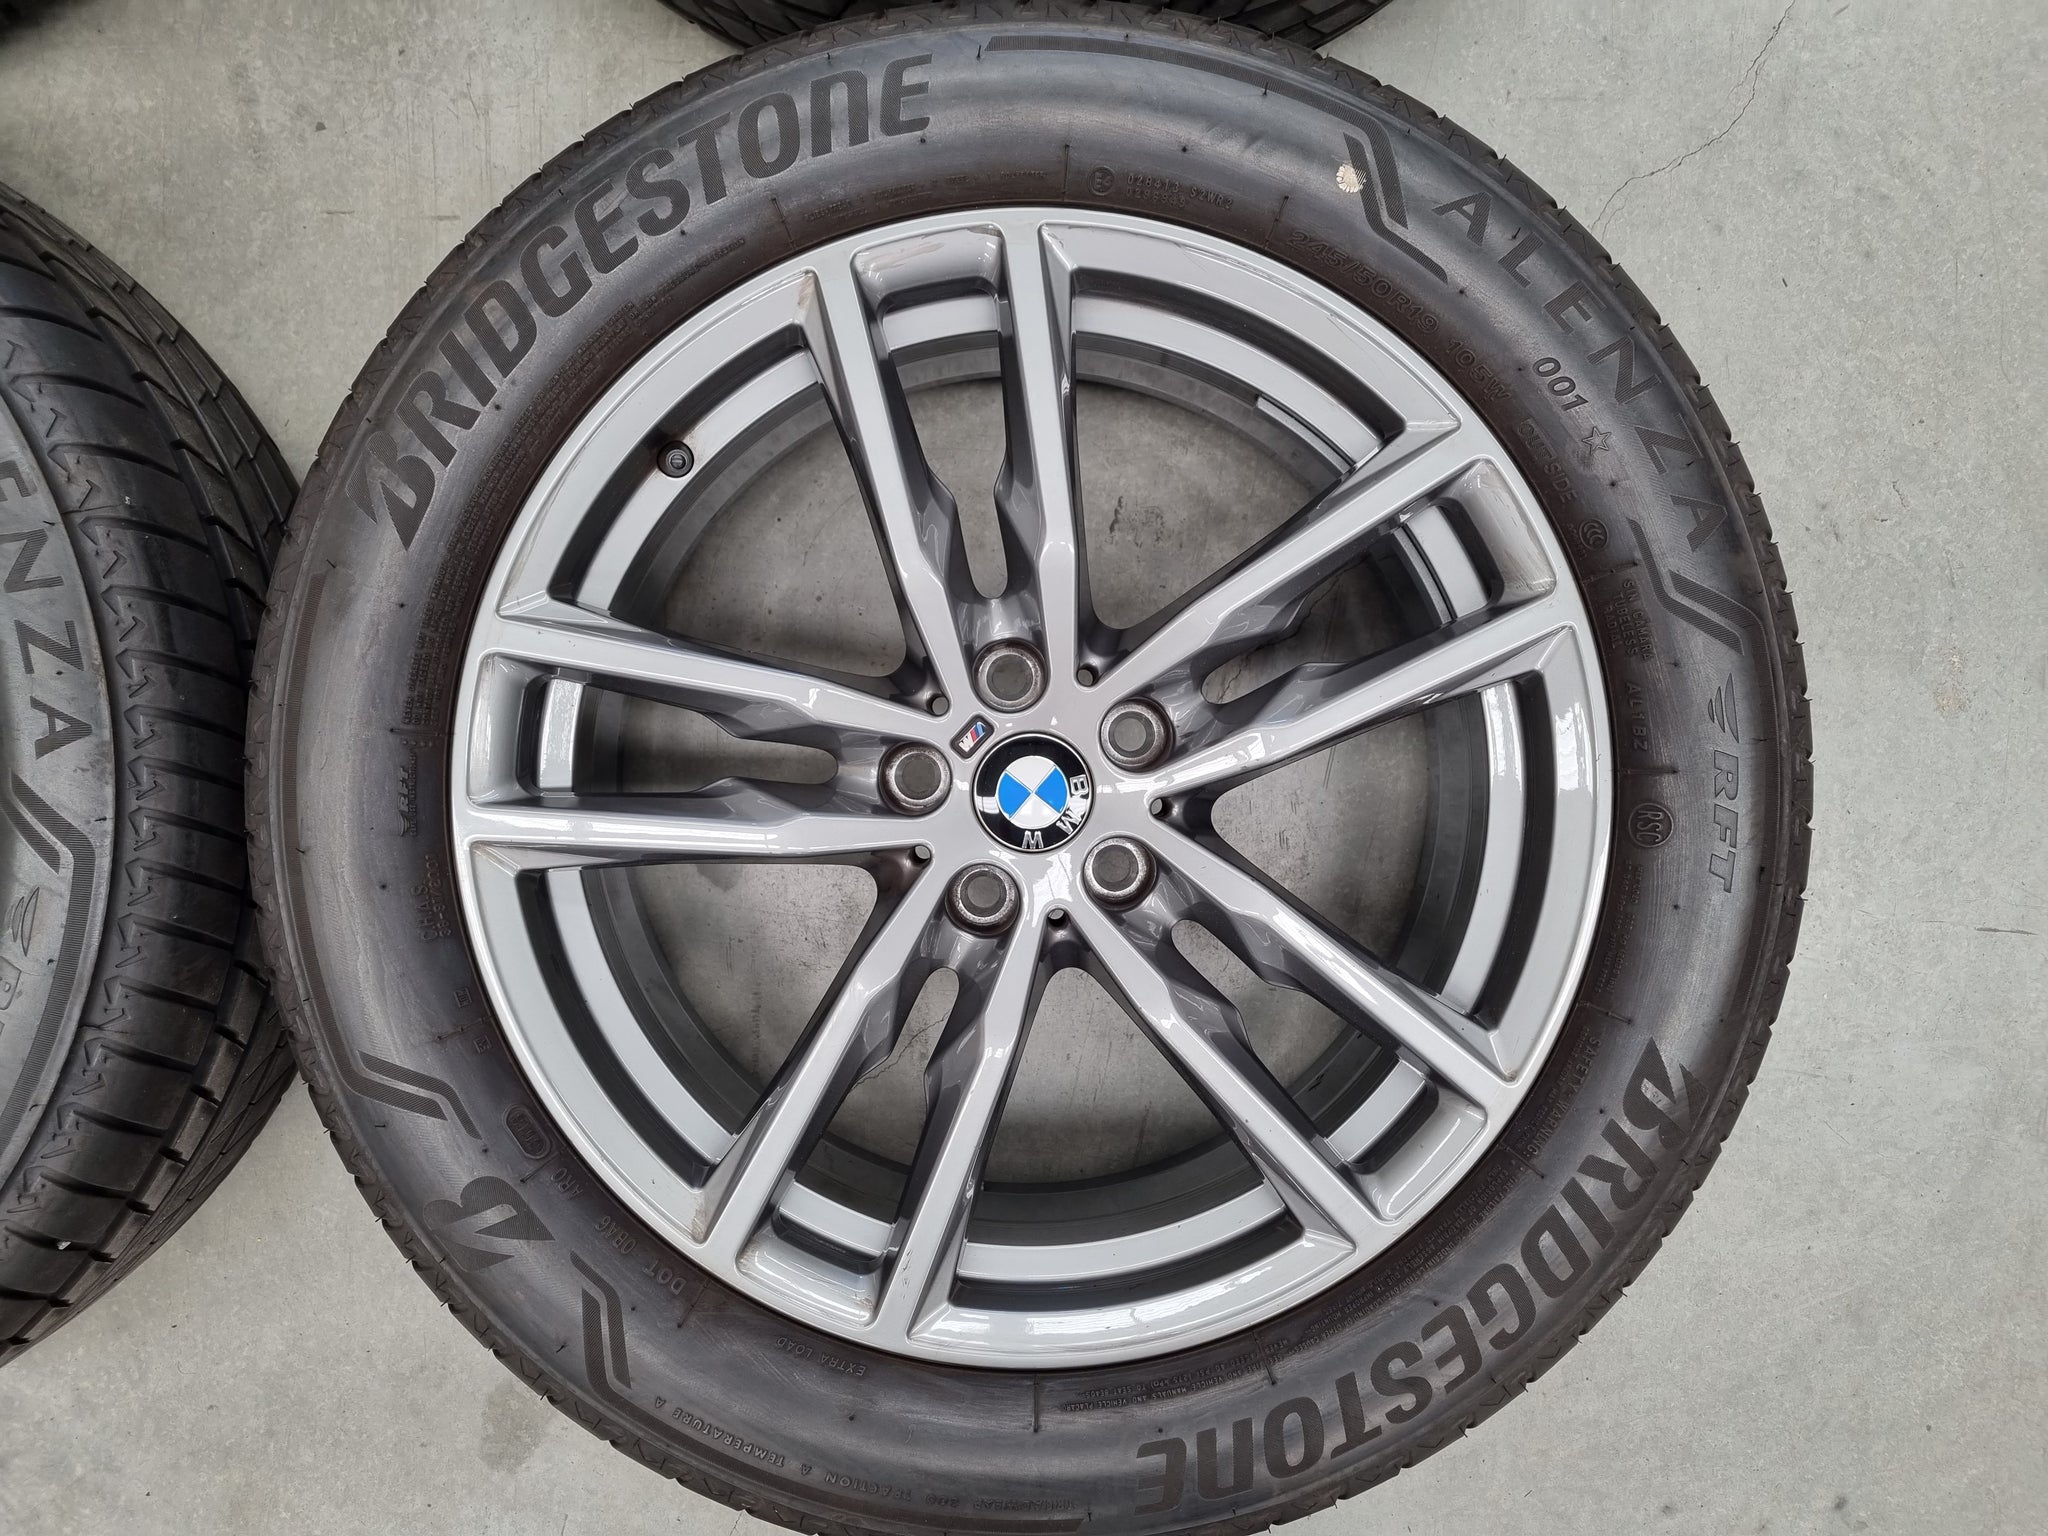 Load image into Gallery viewer, Genuine BMW X3 G01 X4 G02 Style 698M 19 Inch Wheels and Tyres Set of 4
